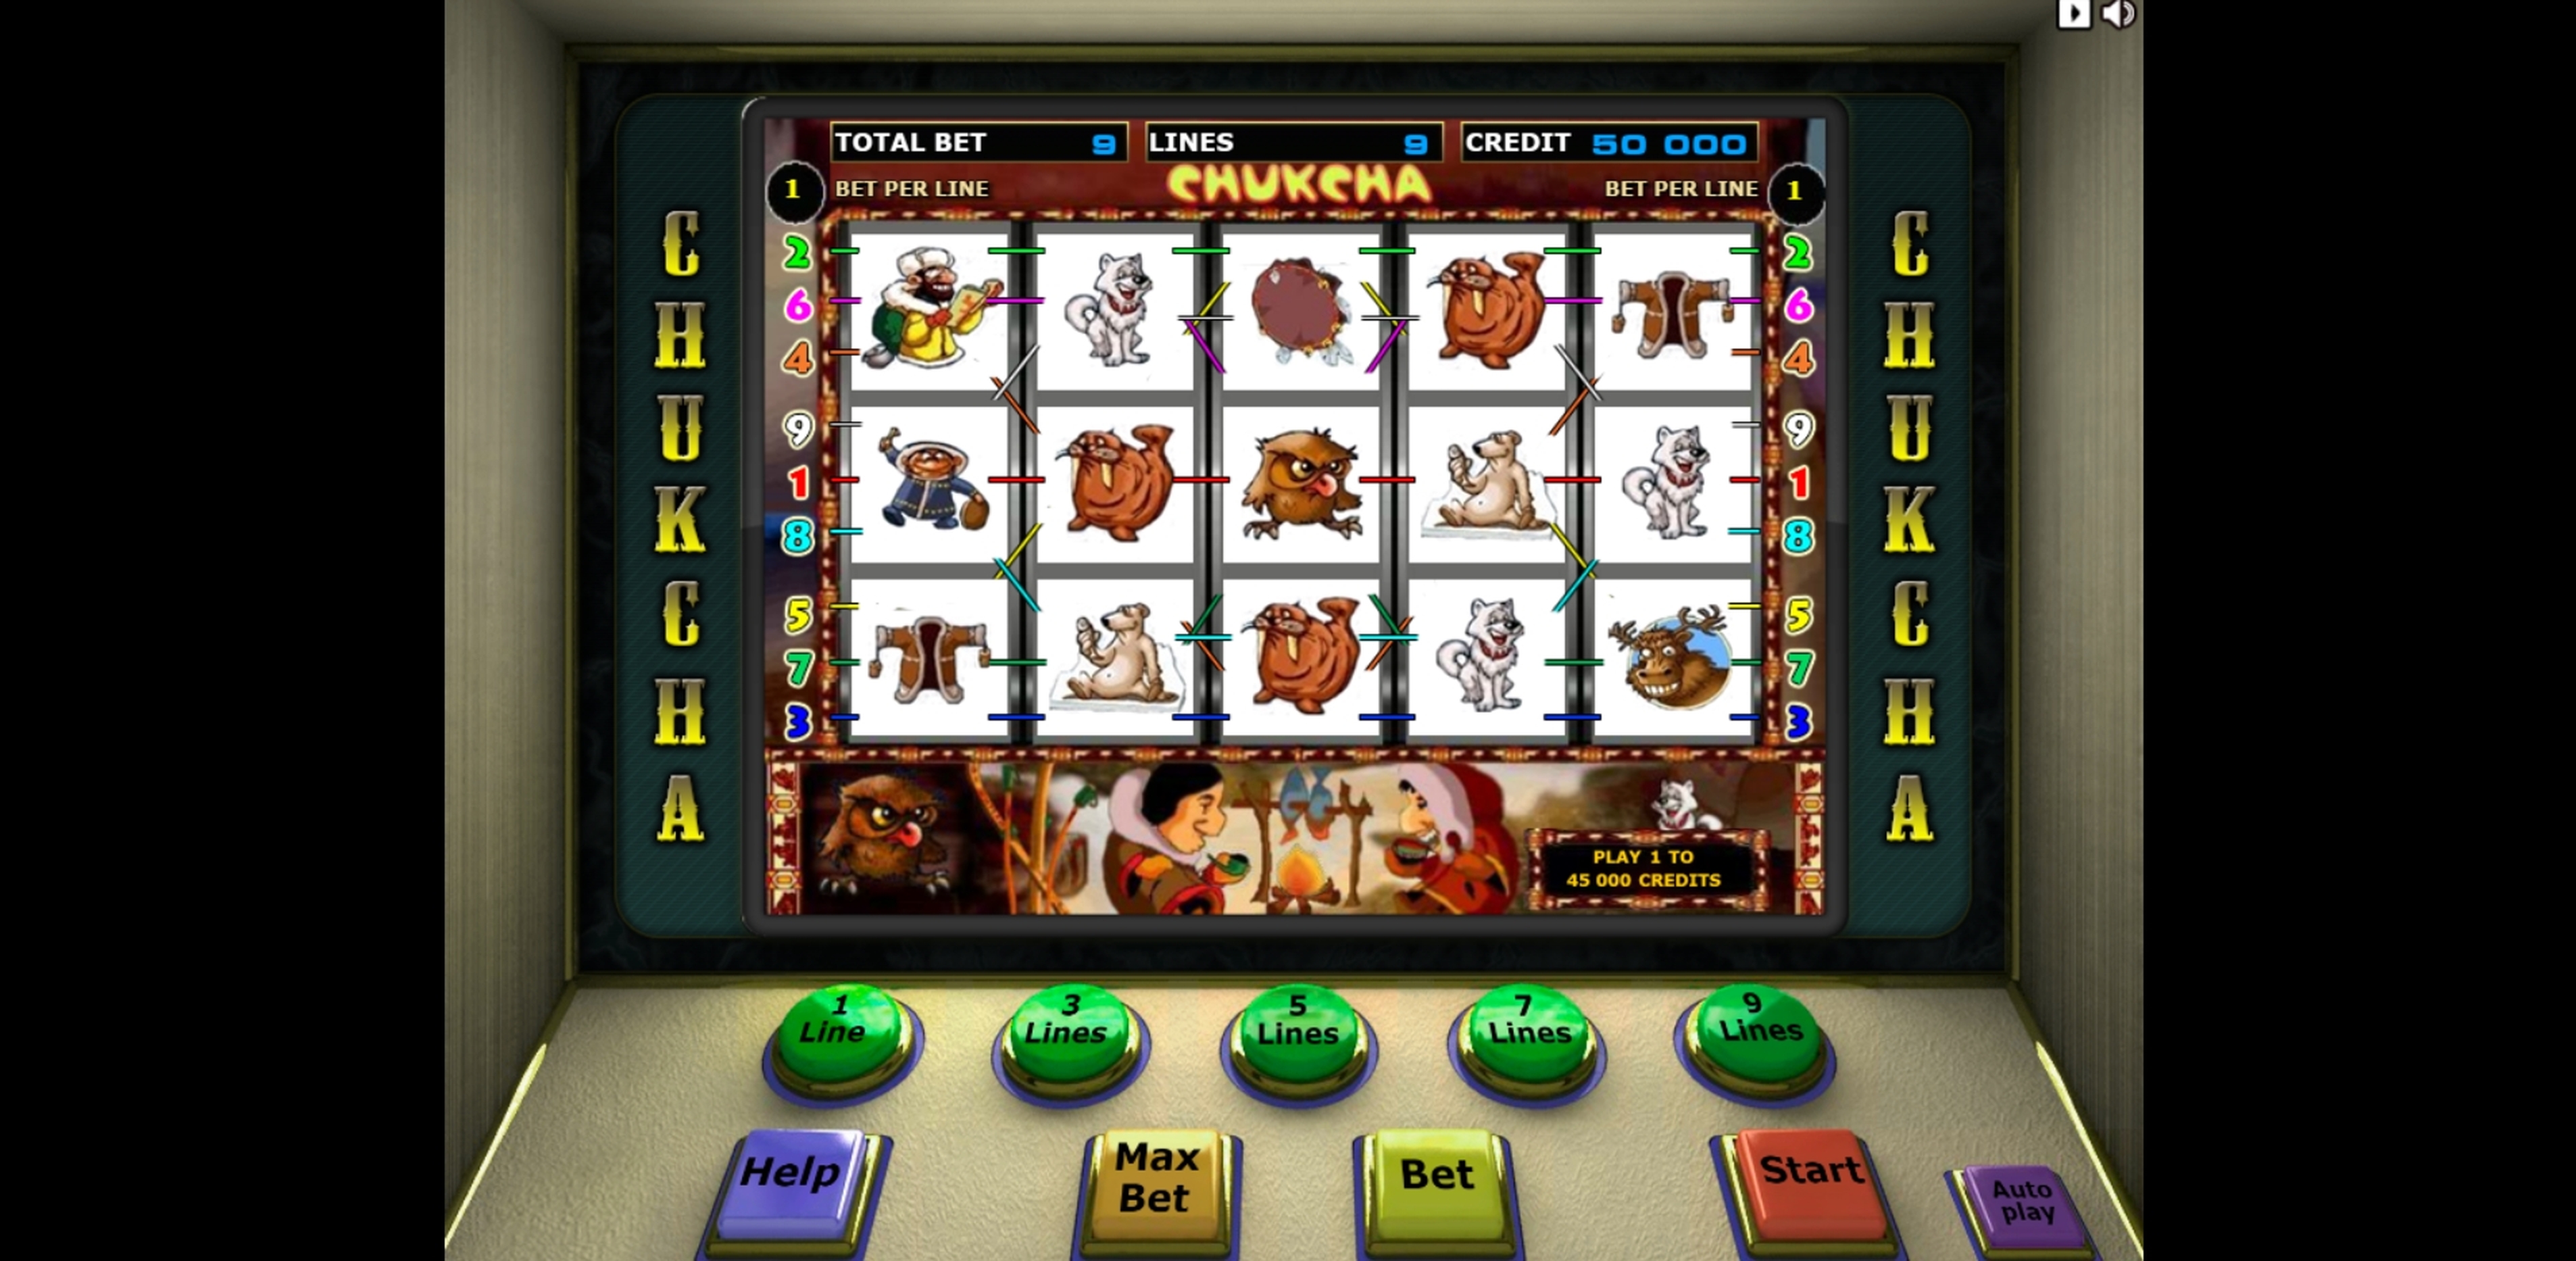 Reels in Chukcha Slot Game by Unicum